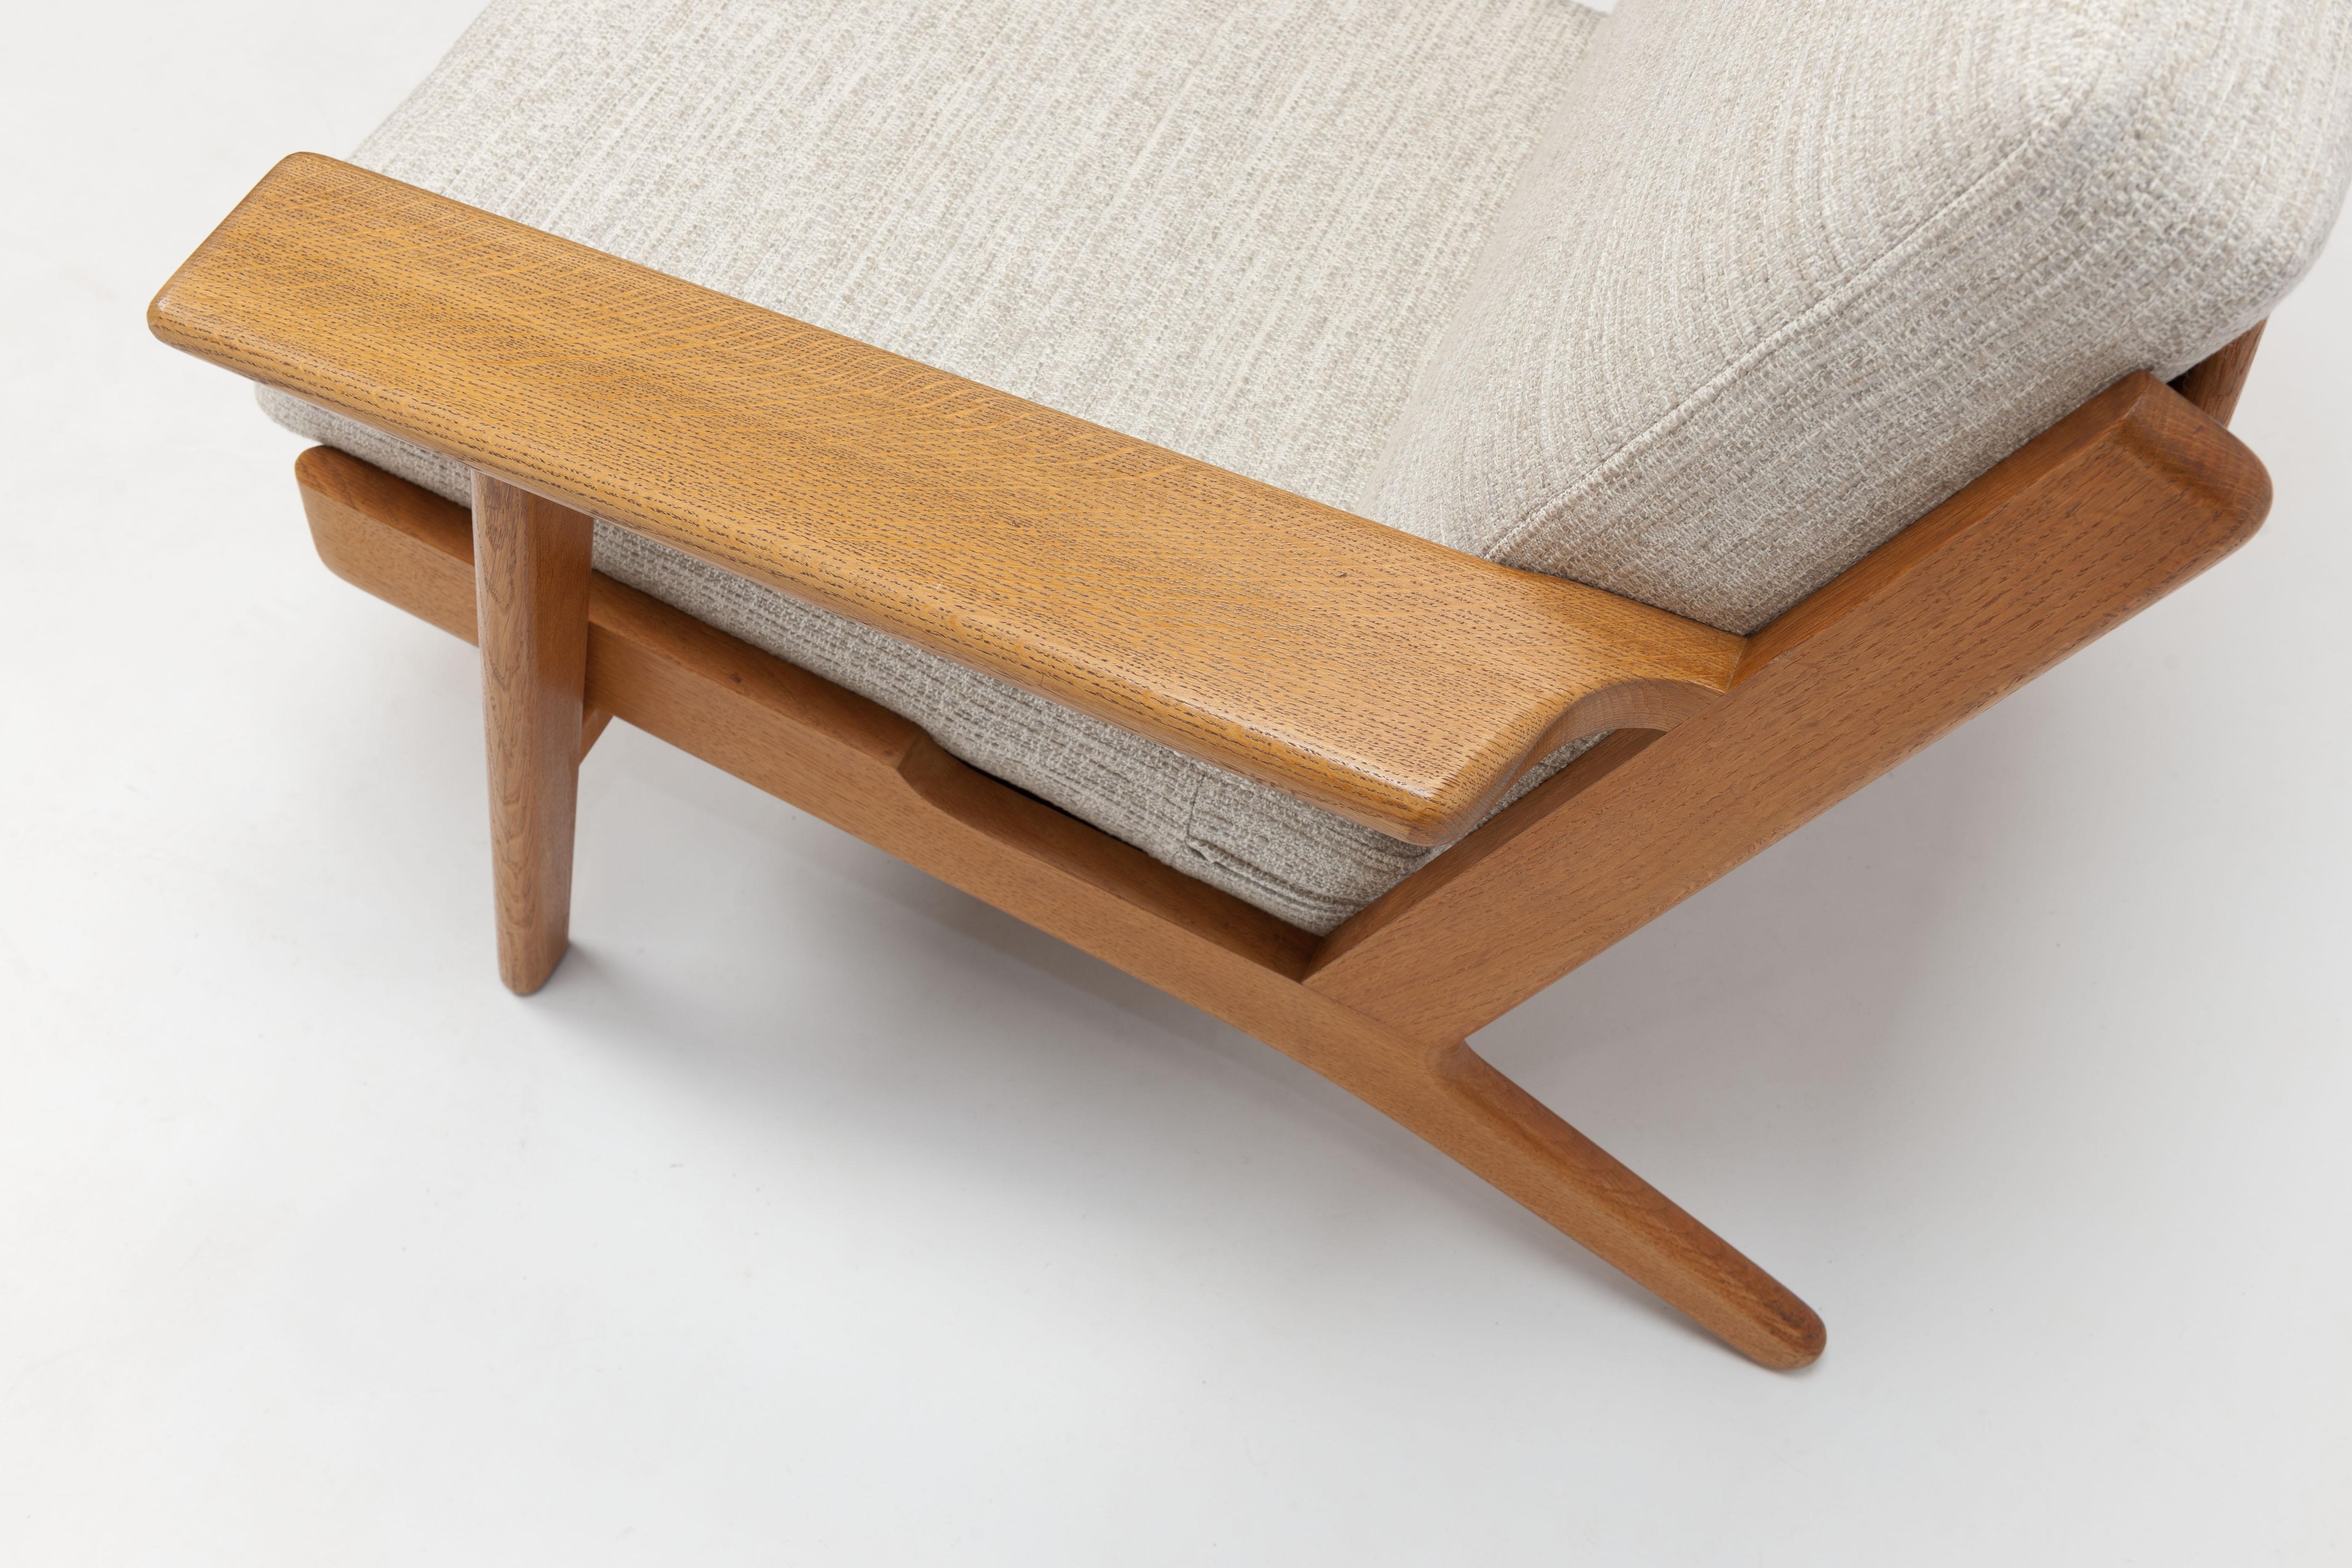 Hans Wegner Oak Lounge Chair GE290 by GETAMA - 2 Pieces Available 2